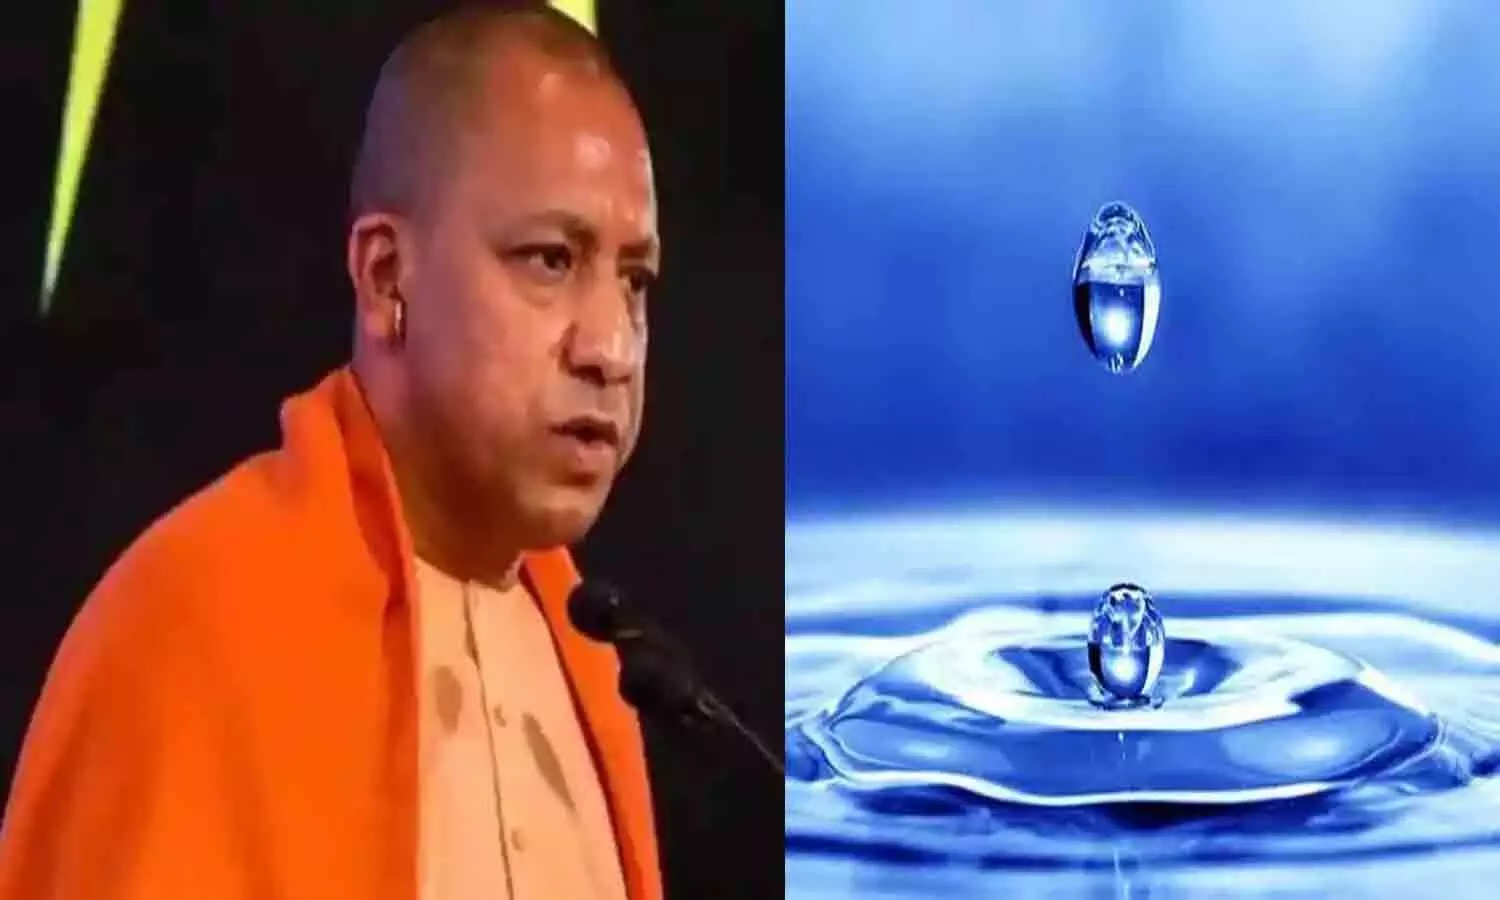 CM Yogi said, every drop of water should be saved from wastage